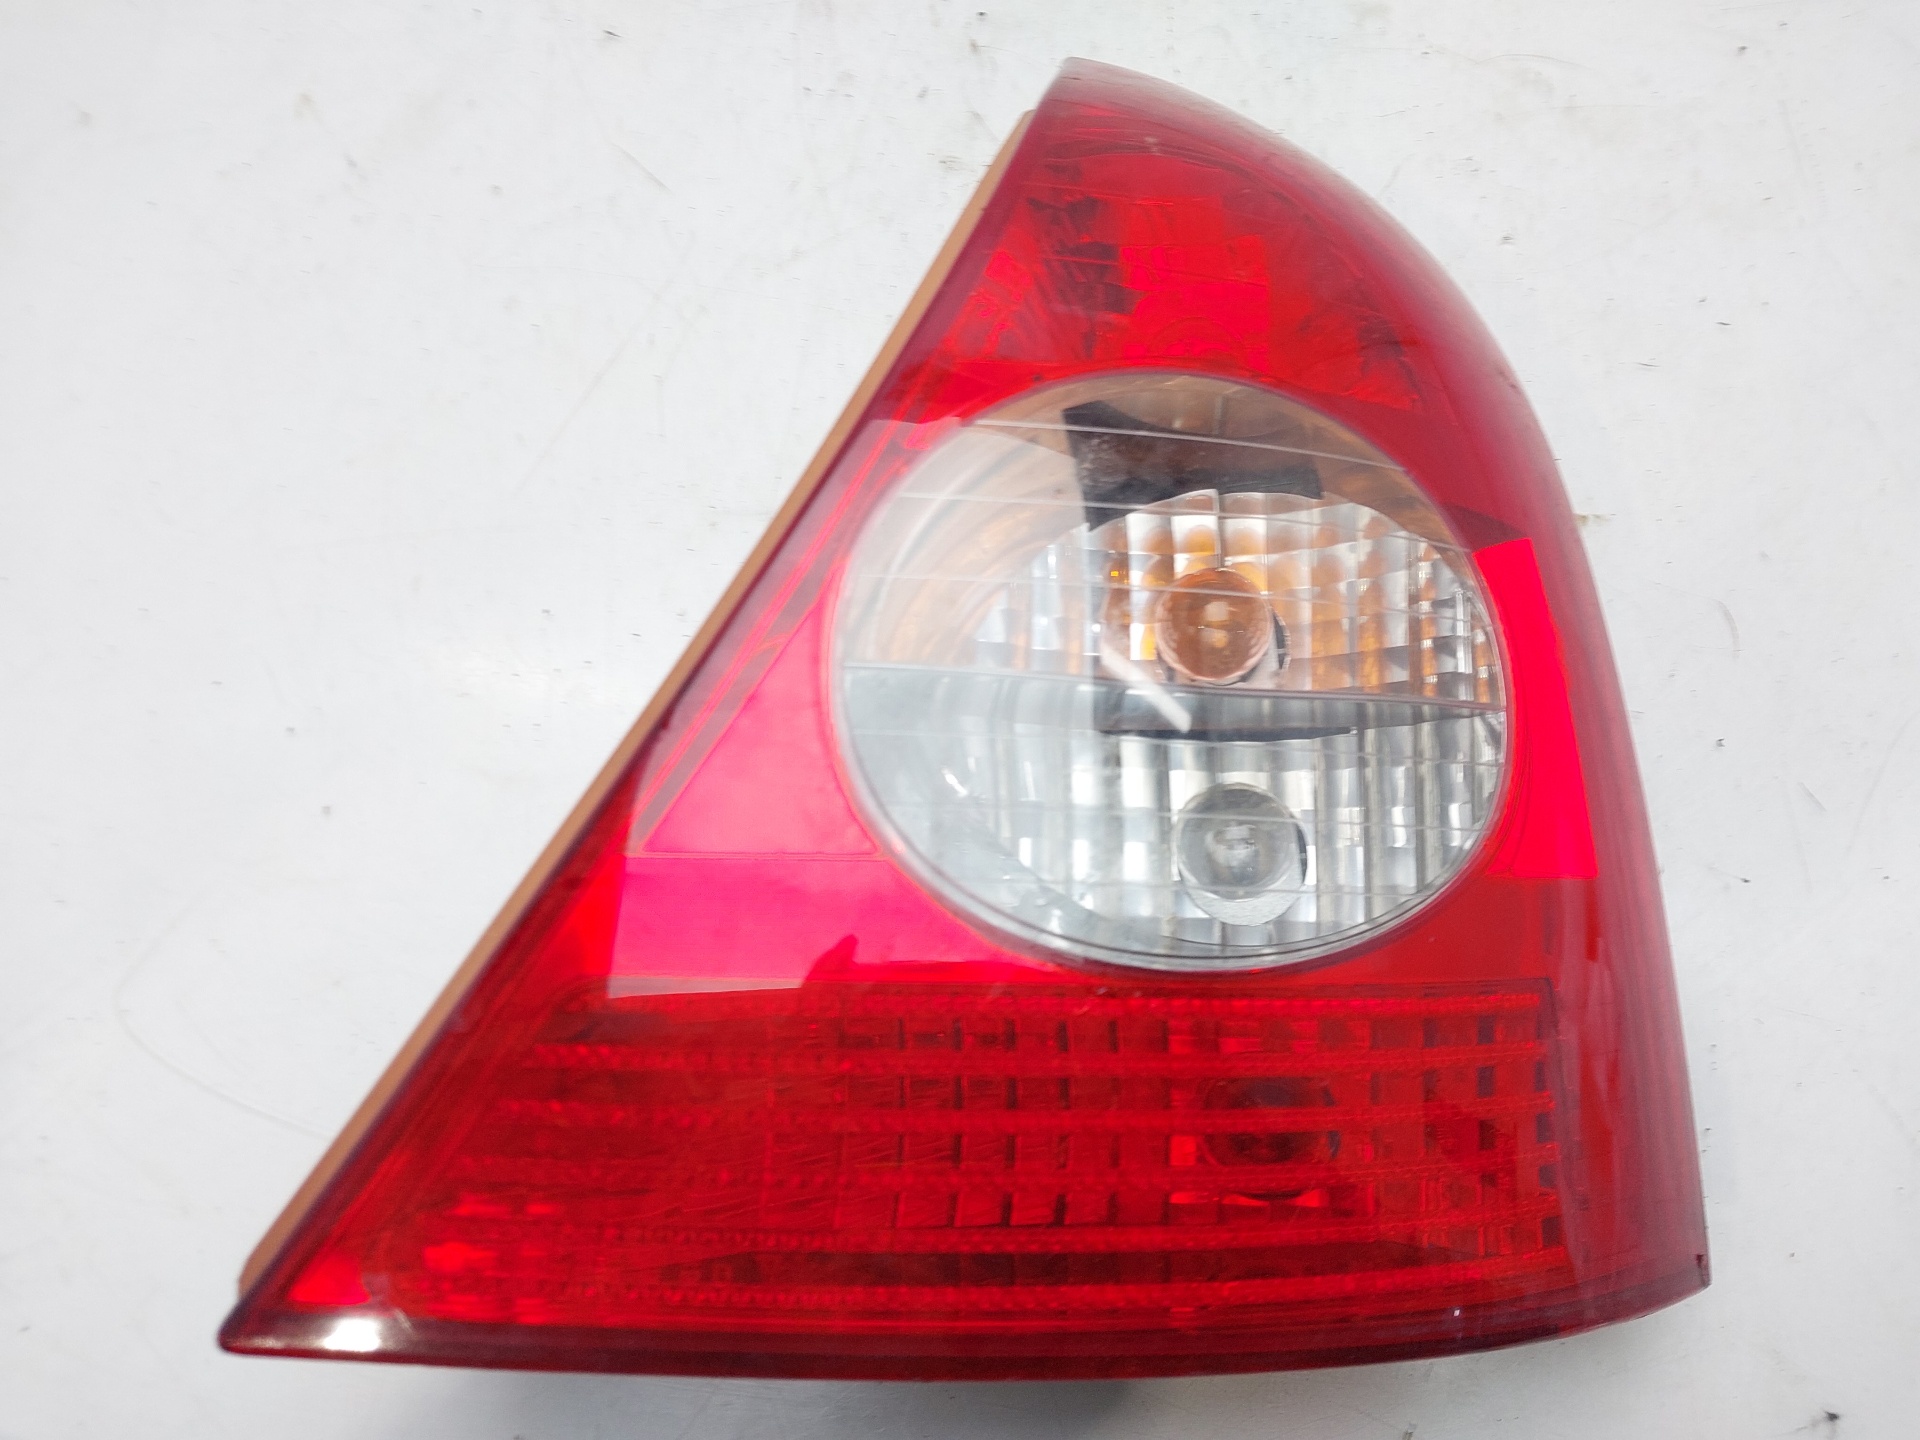 RENAULT Clio 3 generation (2005-2012) Rear Right Taillight Lamp 8200917487 22491339